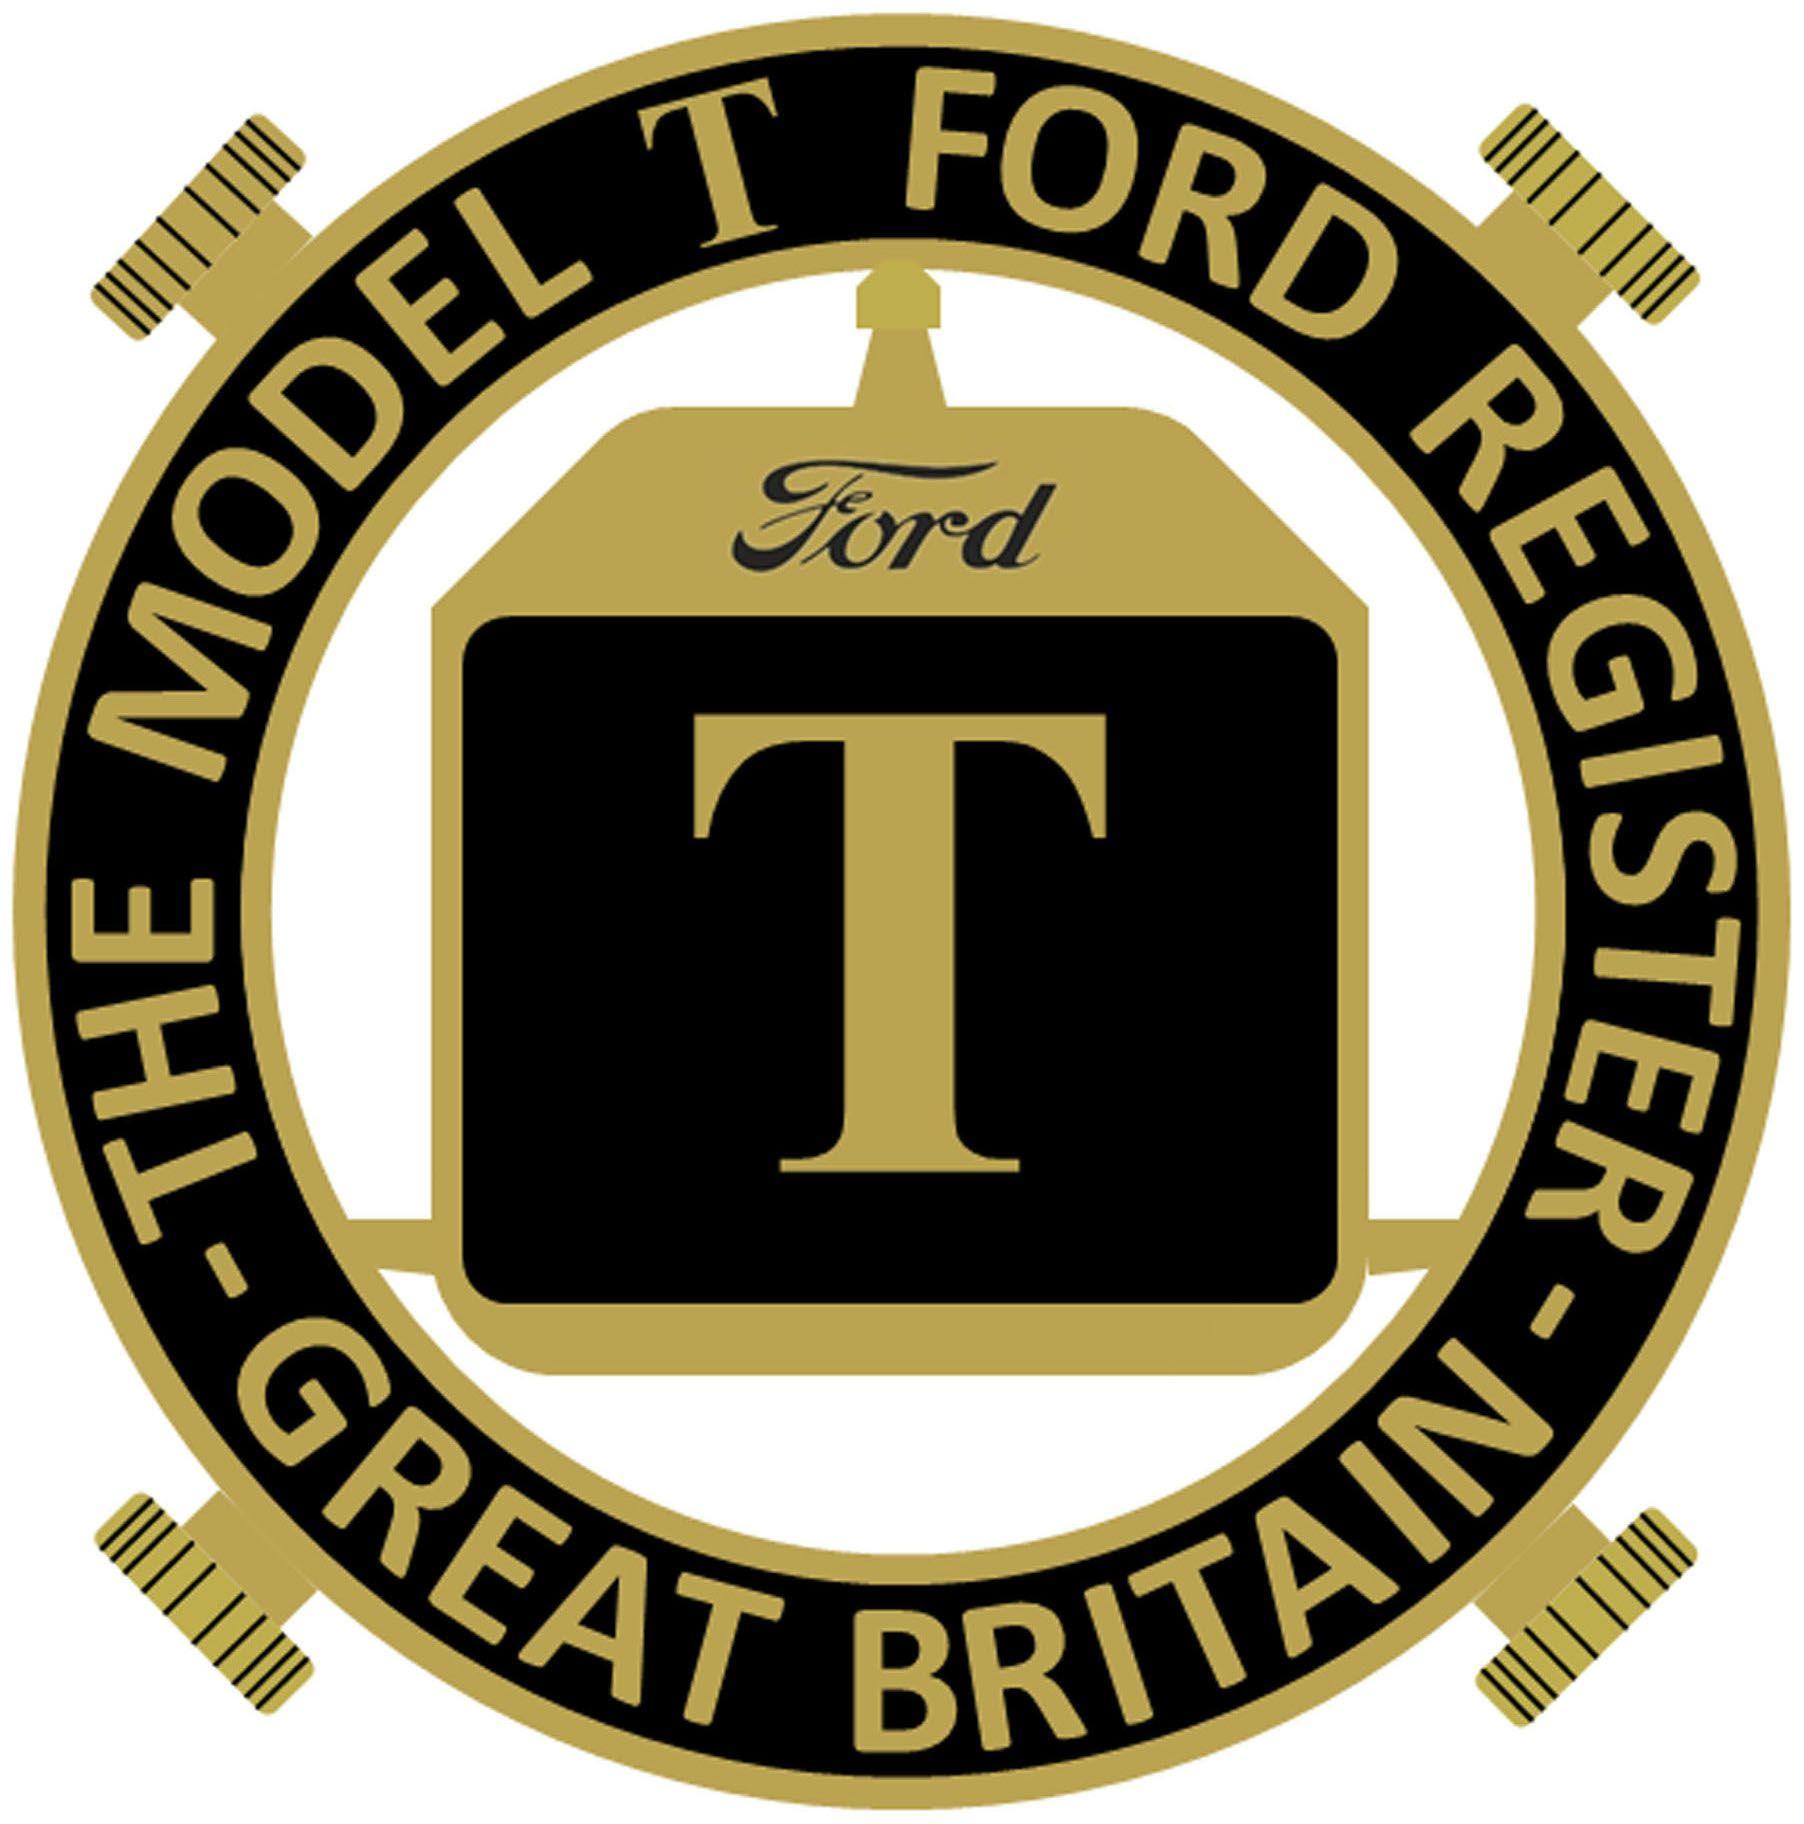 Model T Ford Logo - The Model T Register - A Club For Model T Ford enthusiasts in ...